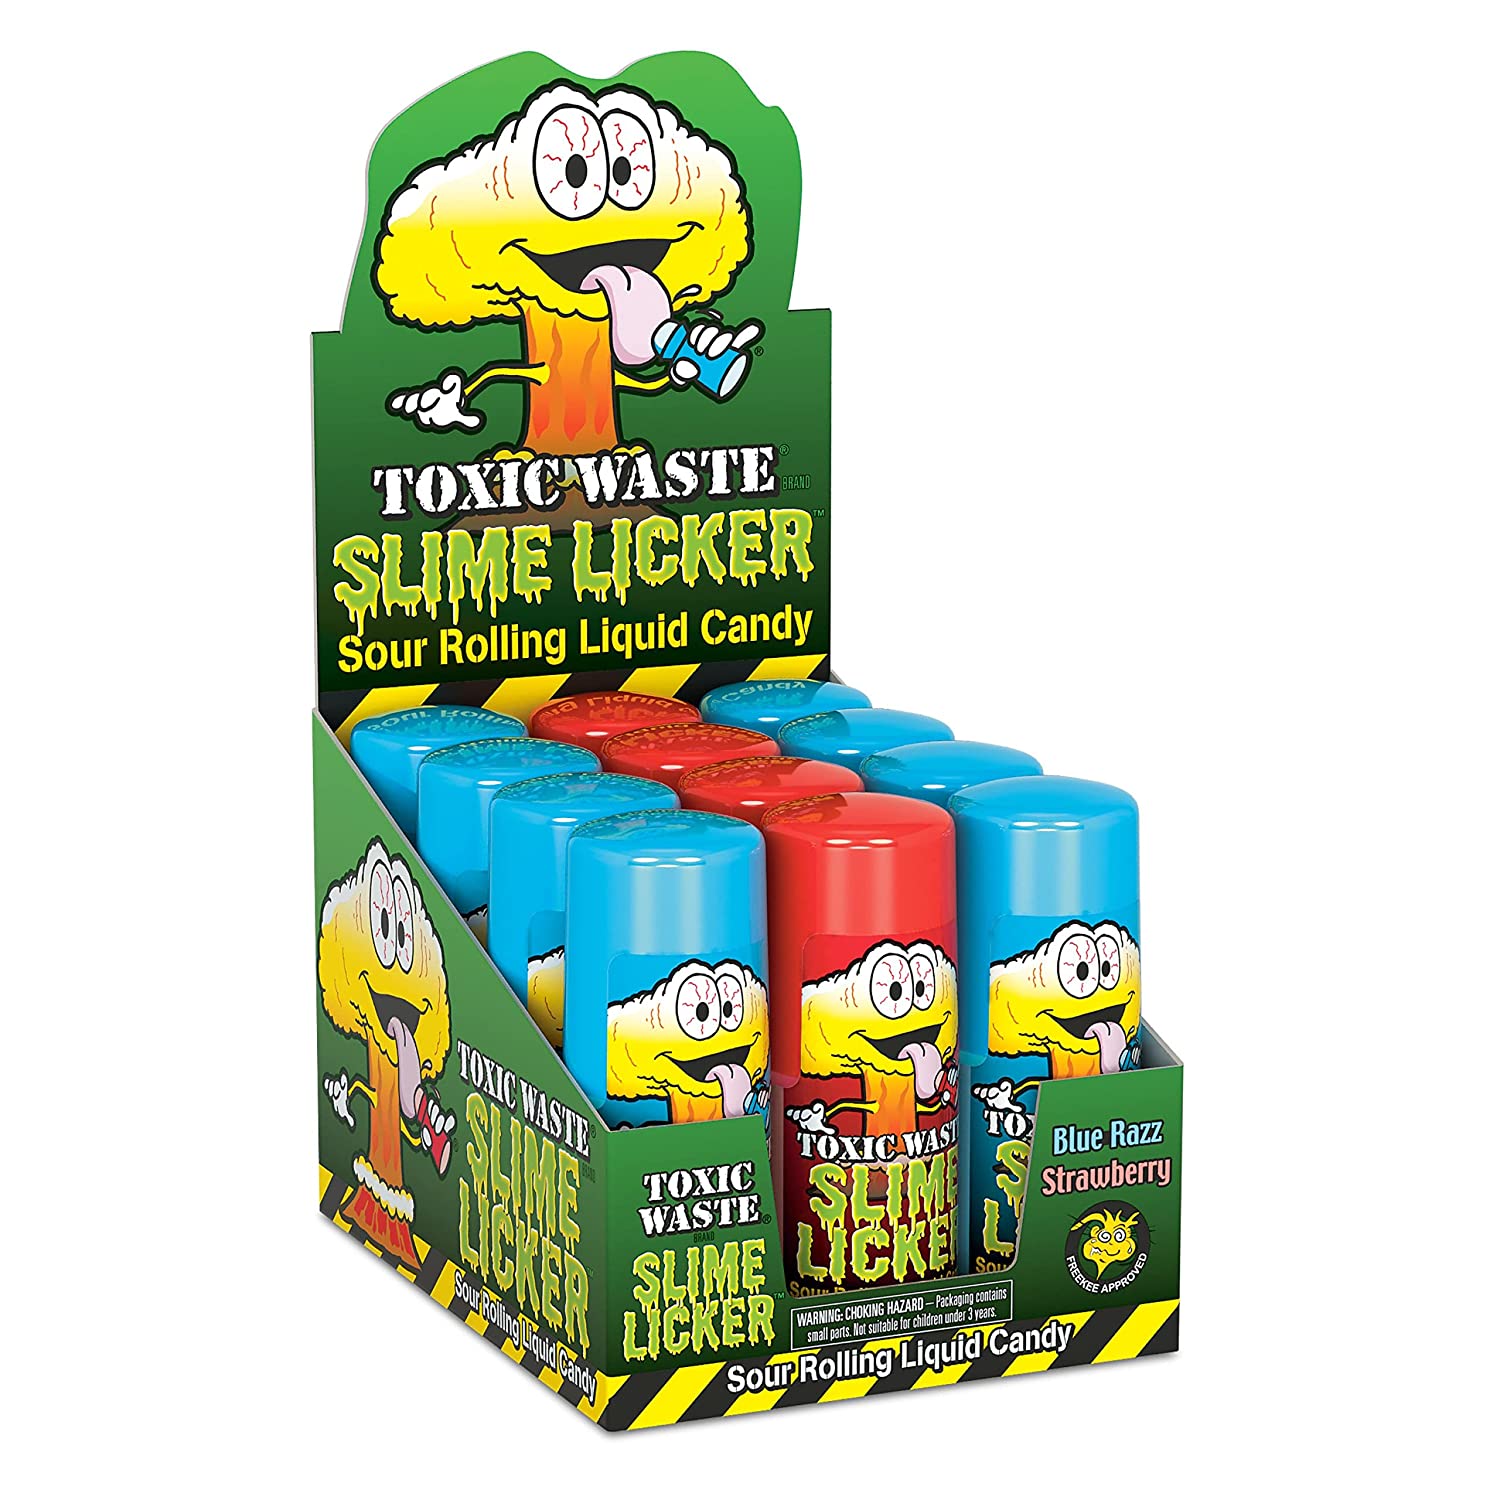 Toxic Waste Slime Licker Sour Rolling Liquid Candy, Blue Razz